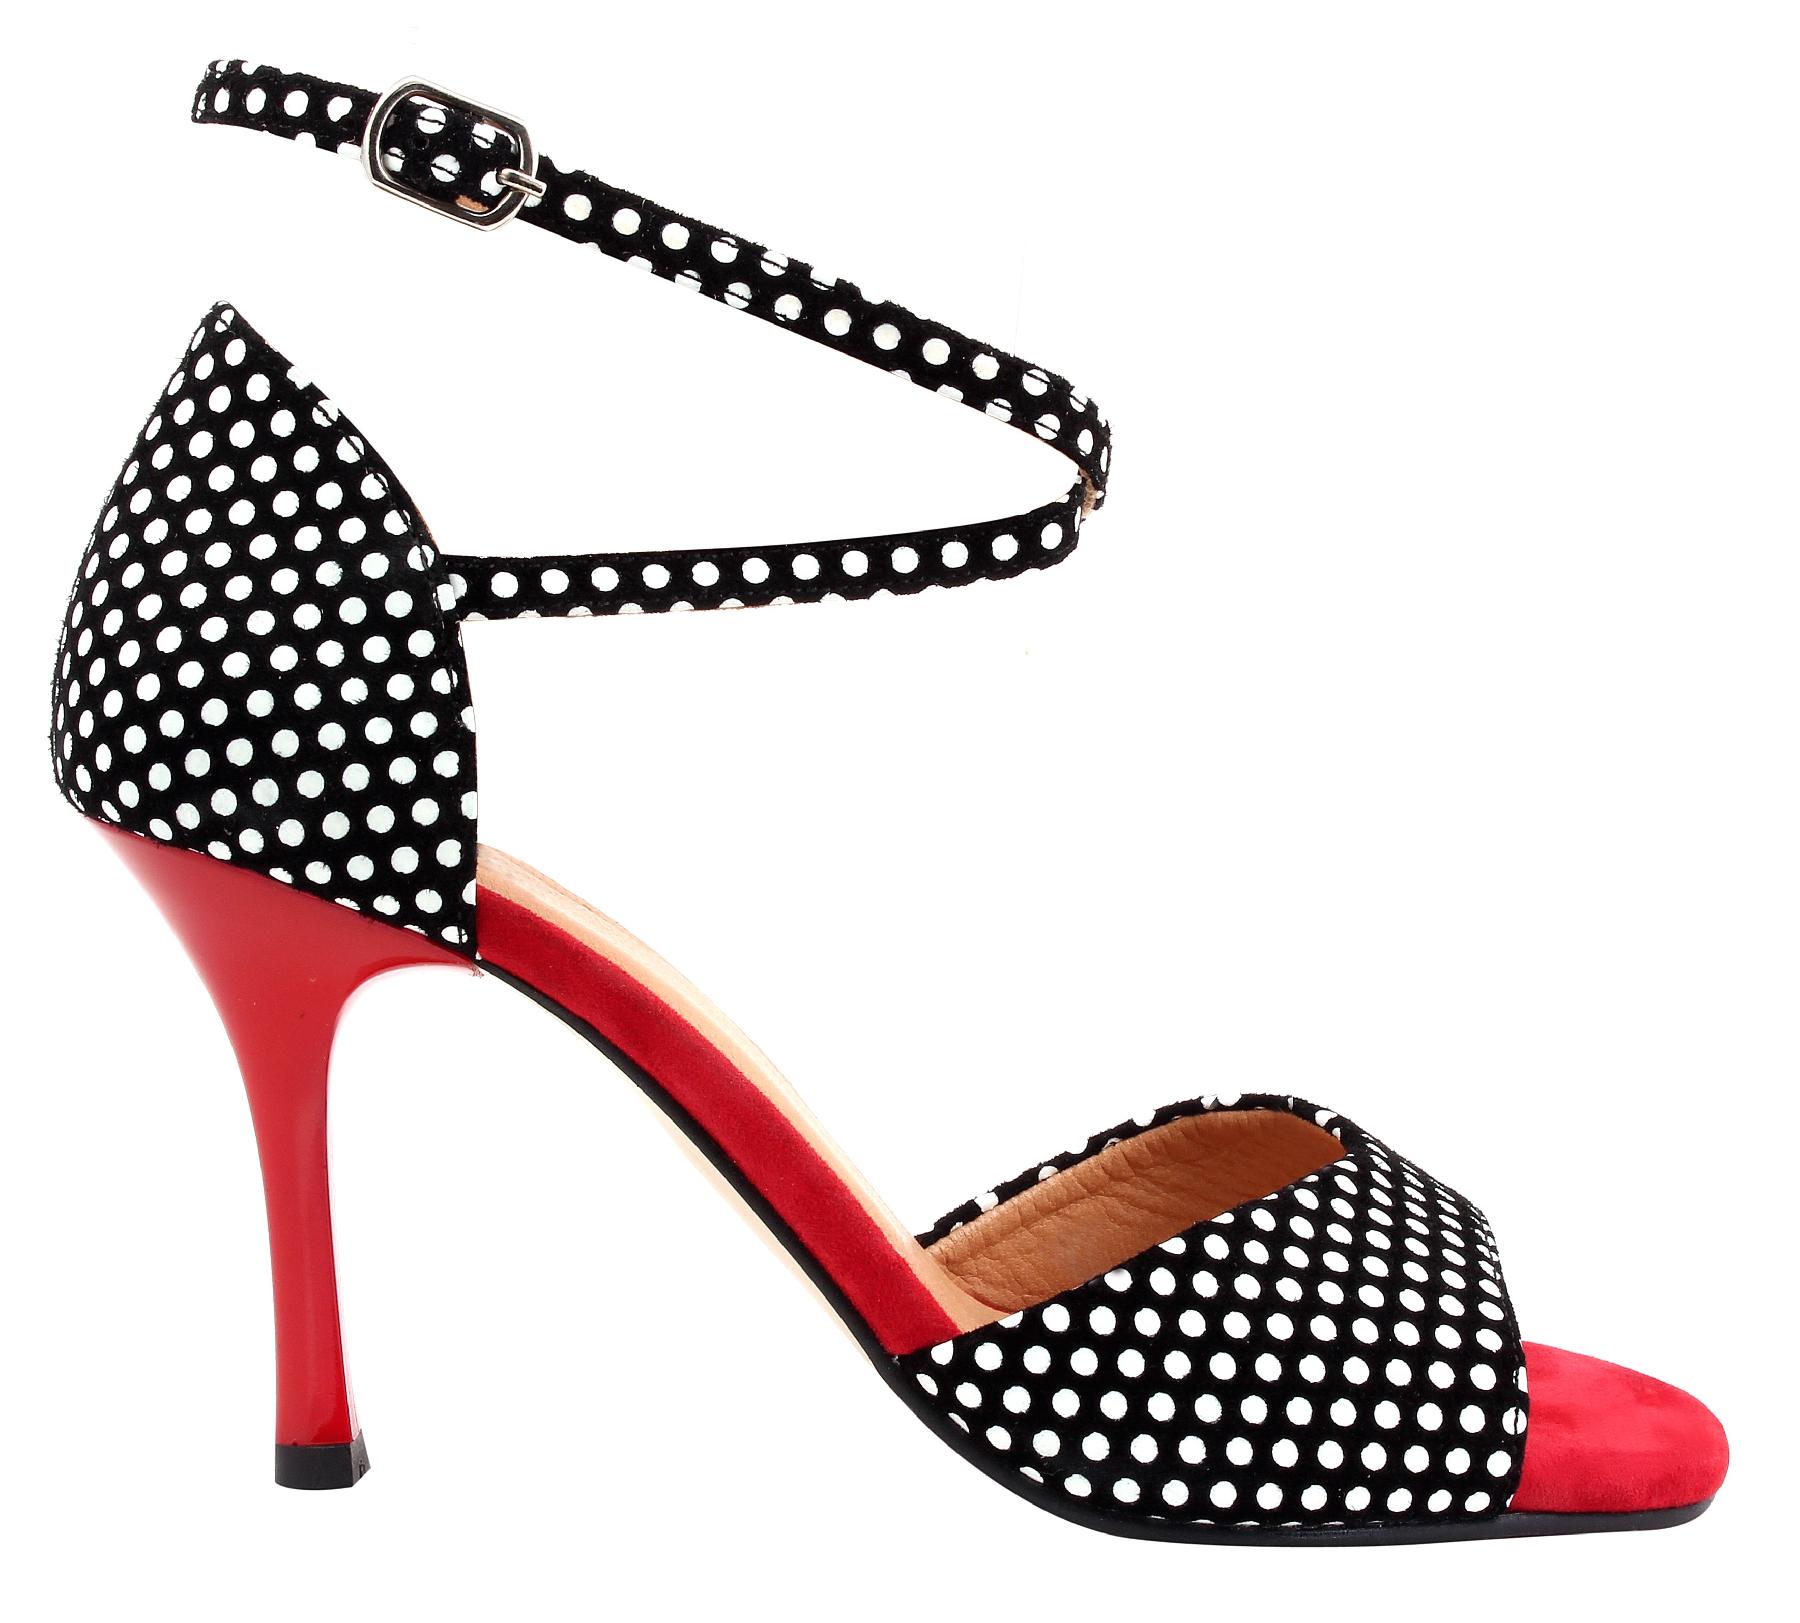 red women's shoes high heels with white polka dots